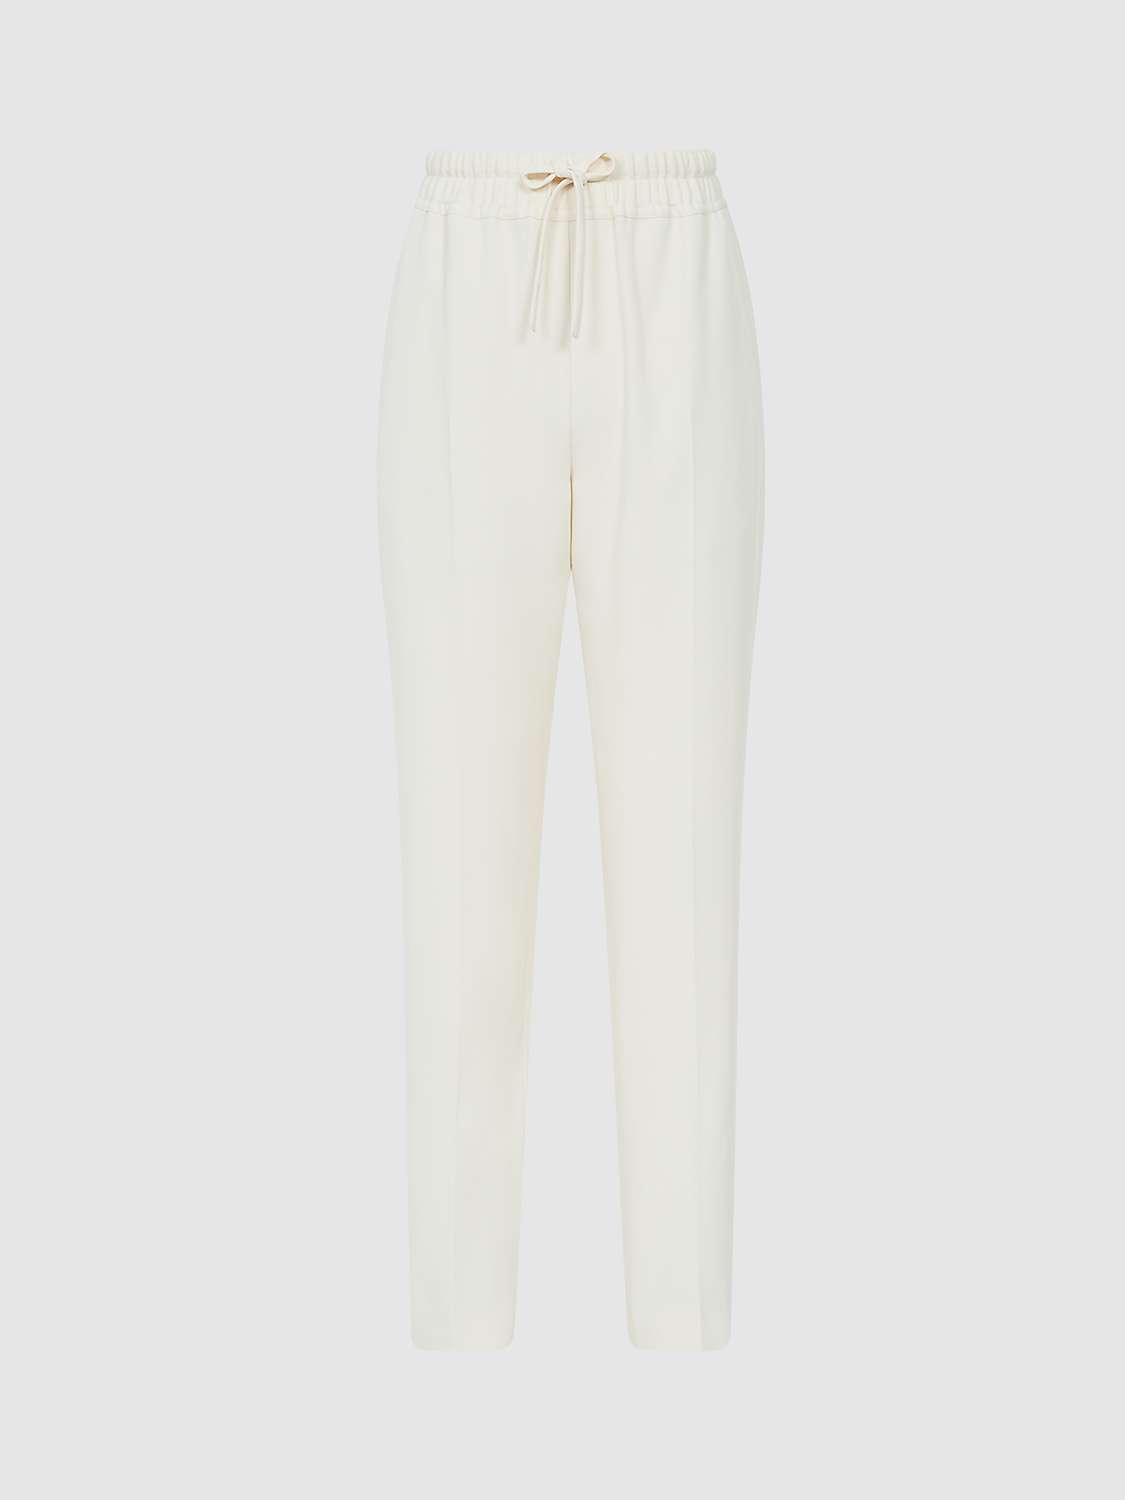 Buy Reiss Petite Hailey Pull On Trousers, Cream Online at johnlewis.com